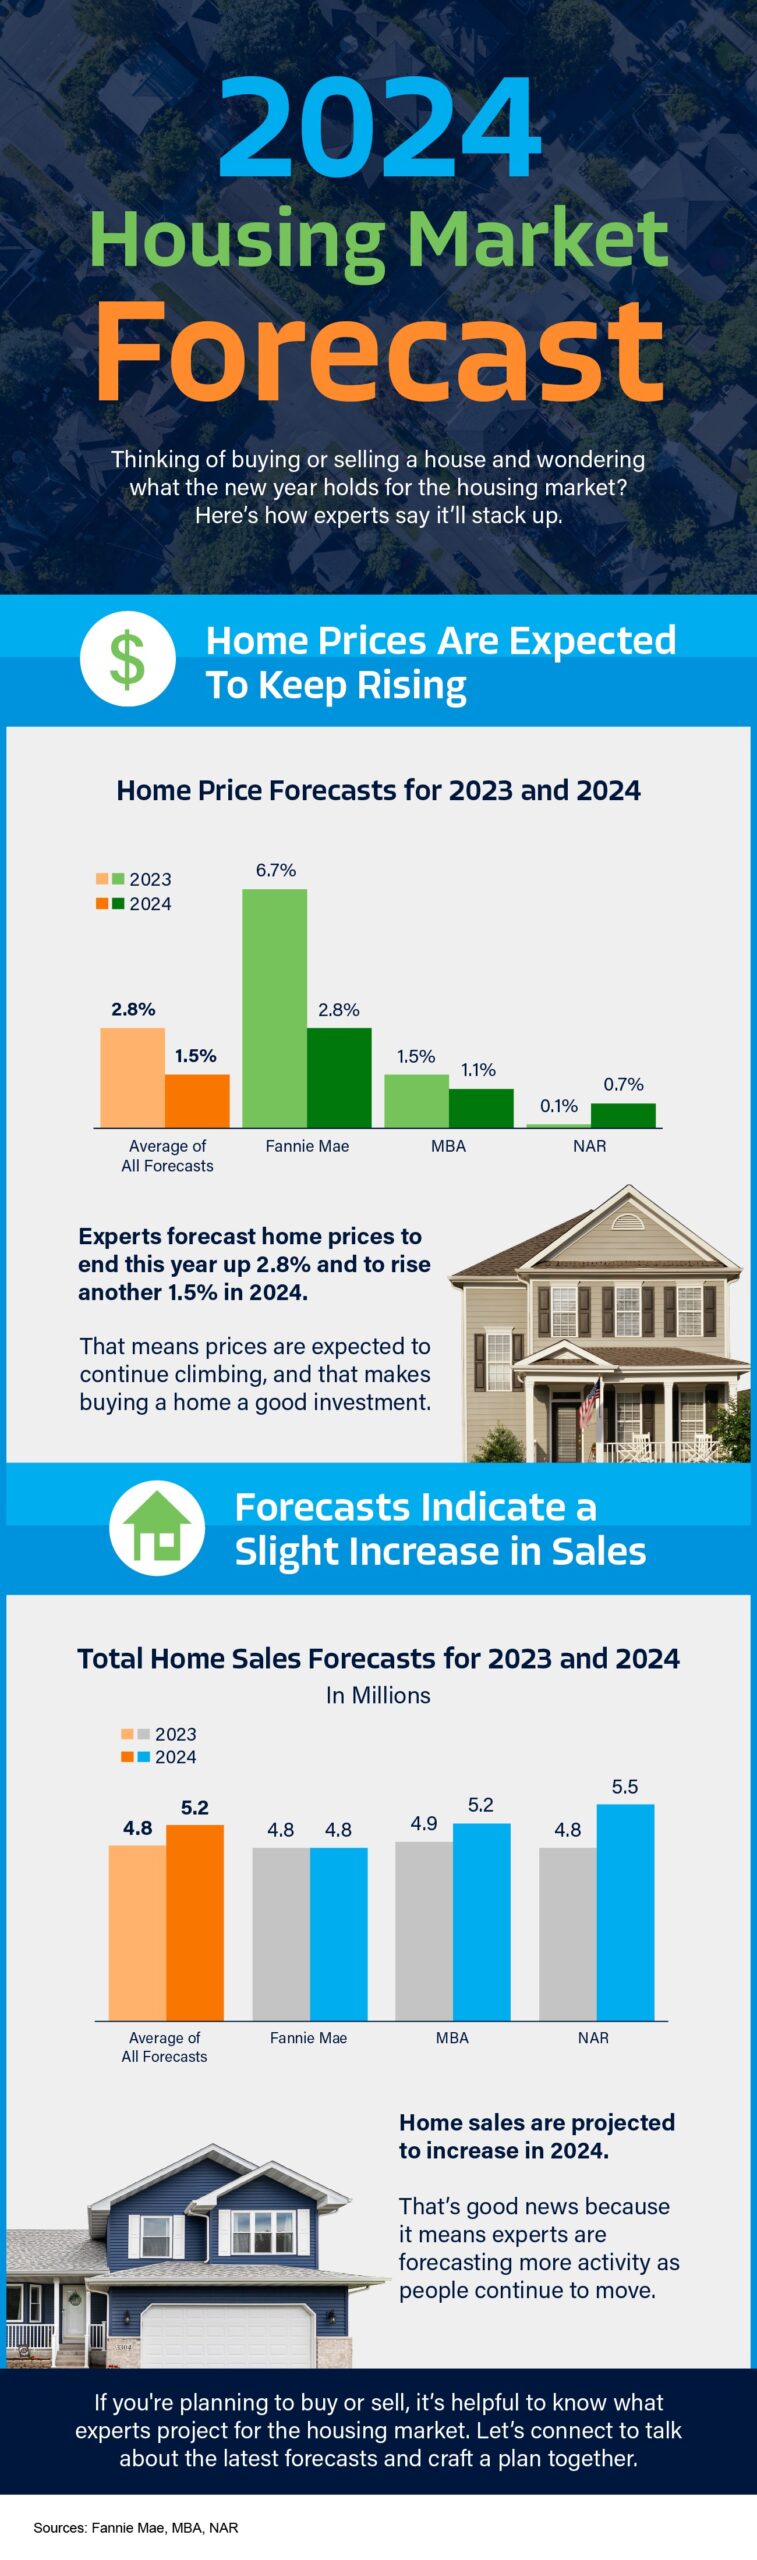 2024 Housing Market Forecast [INFOGRAPHIC] Kevin Maalizadeh, Los